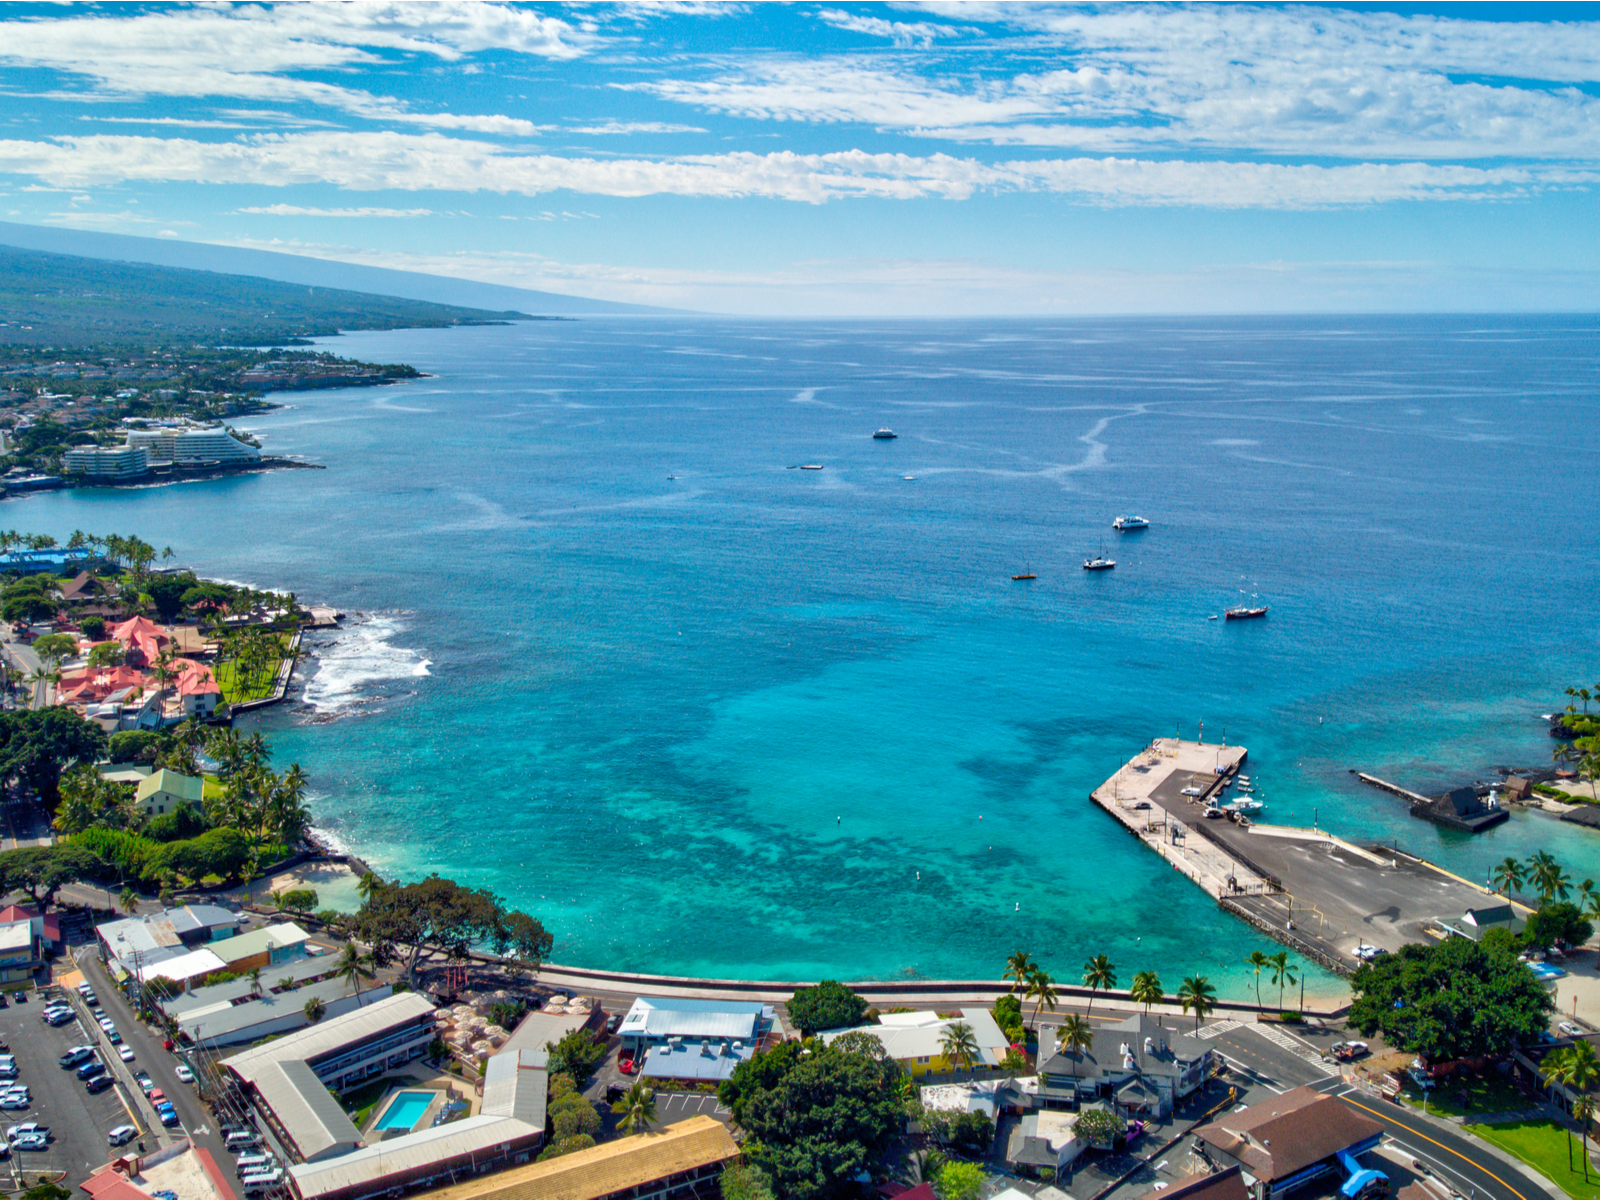 Aerial view on the peaceful Kailua-Kona Town structures as the best hotels in Kona, Hawaii, with few ships sailing on its calm emerald waters